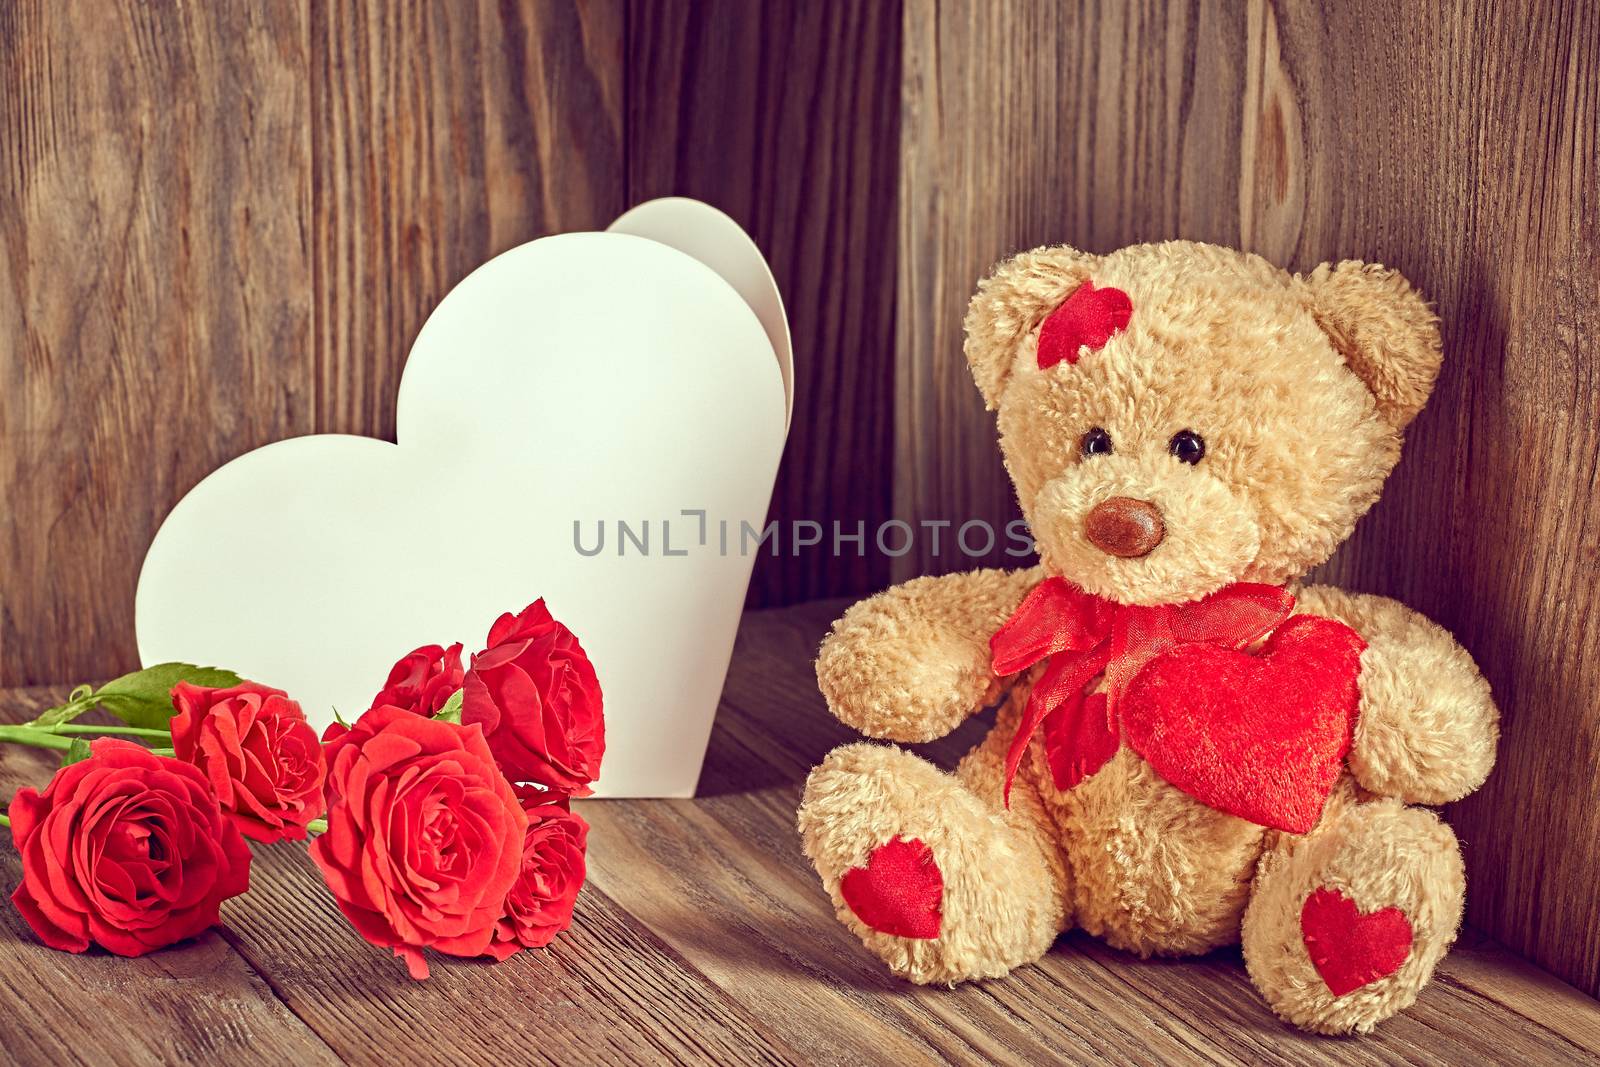 Valentines Day. Teddy Bear Loving with red hearts sitting alone. Note and bouquet of red roses. Vintage. Retro romantic styled on wooden background. Copyspase